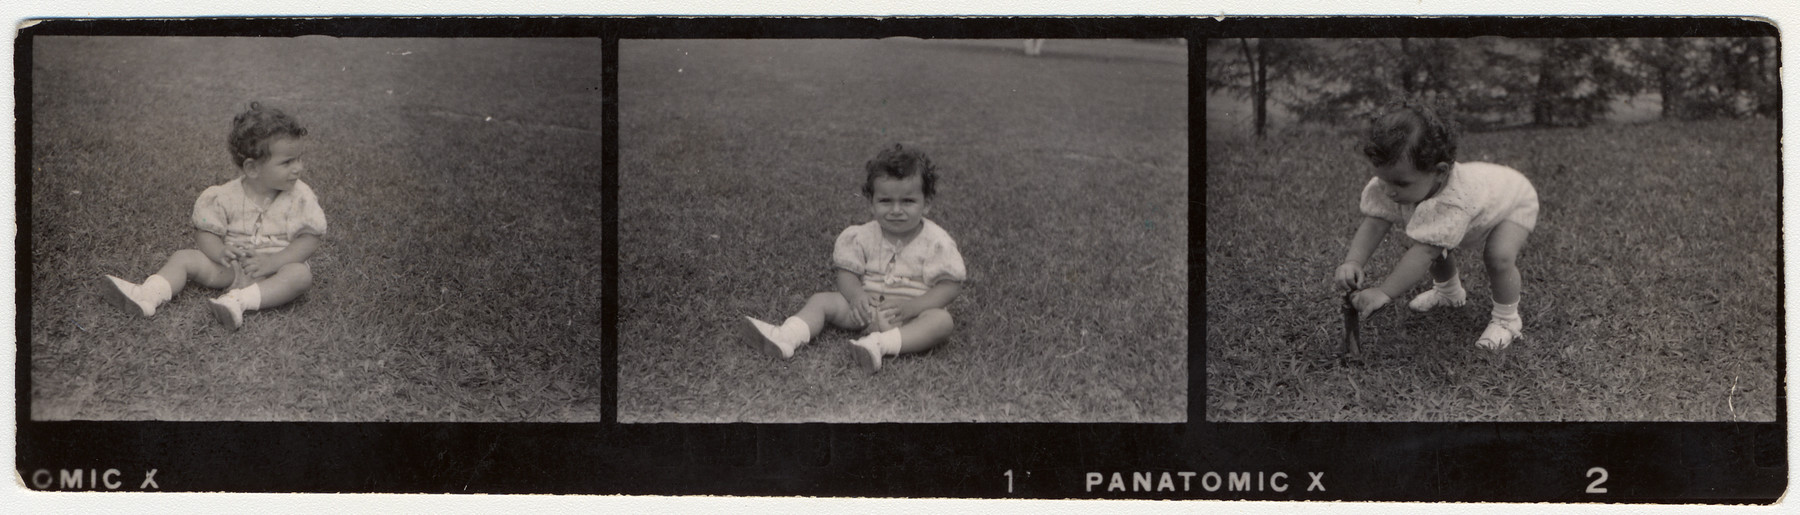 Contact strip representing Margarida Reik (now Margarida Lane Reik de Frankel), the granddaughter of Helene Reik, playing on a field in Teresopolis, Brazil, in April 1940.   

The photograph was sent to Helene Reik who used the back as paper for her diary in the Theresienstadt ghetto.